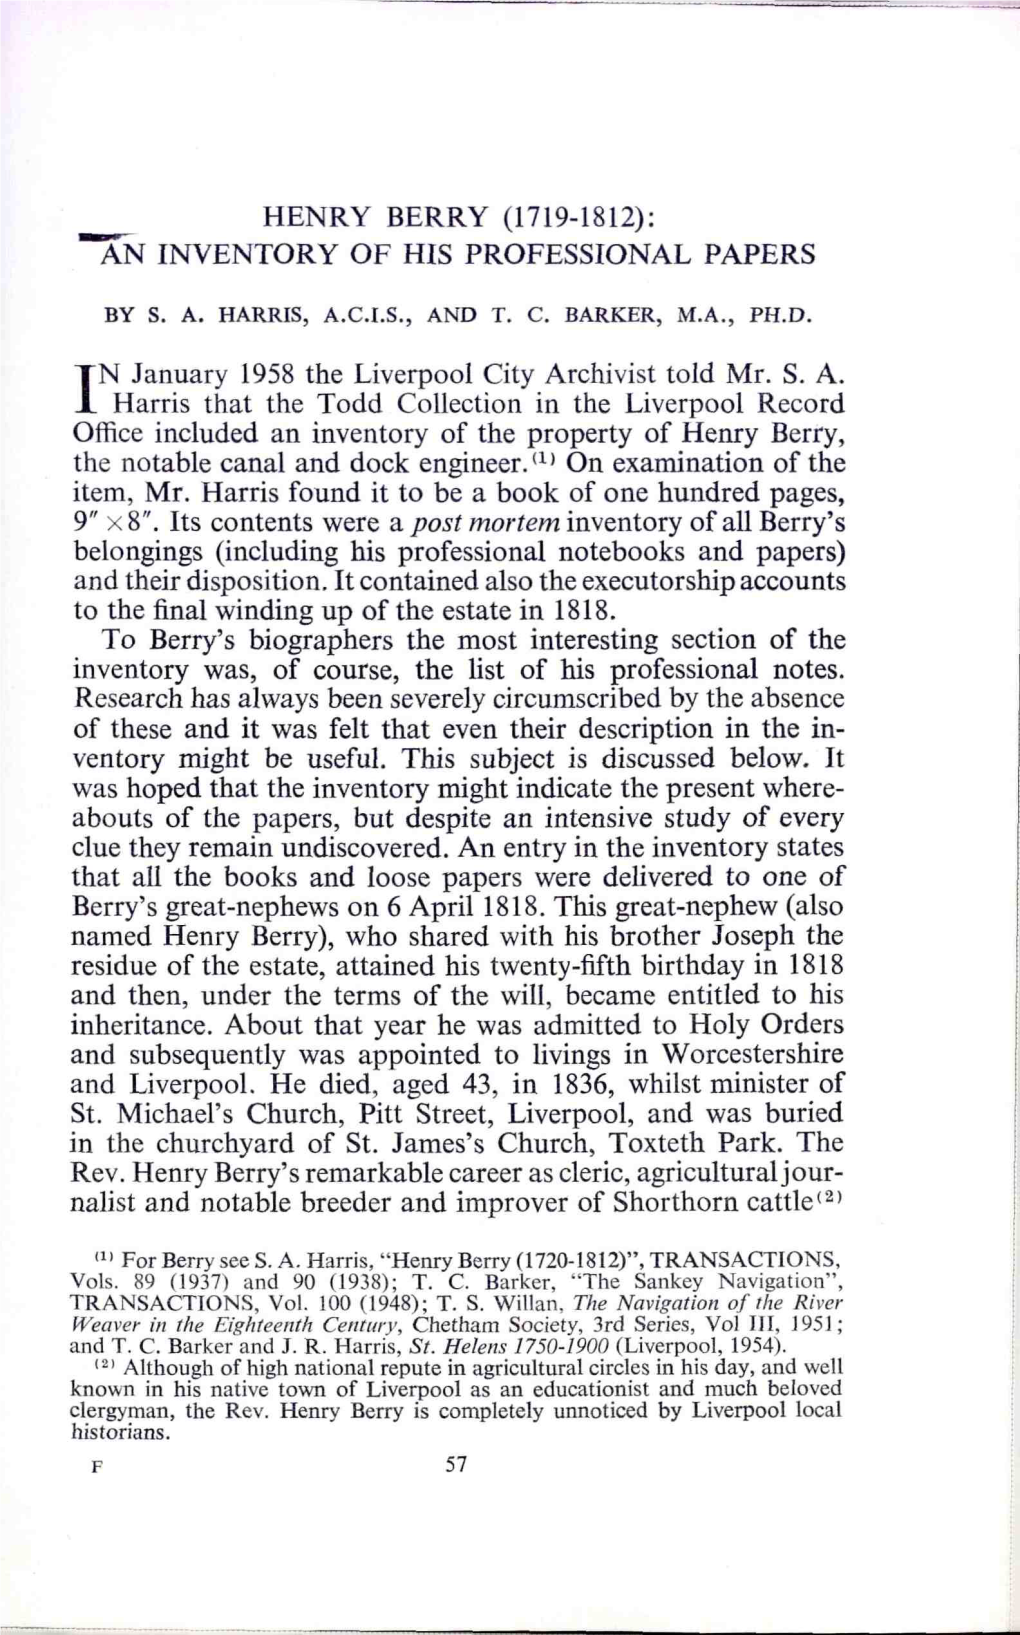 IN January 1958 the Liverpool City Archivist Told Mr. SA